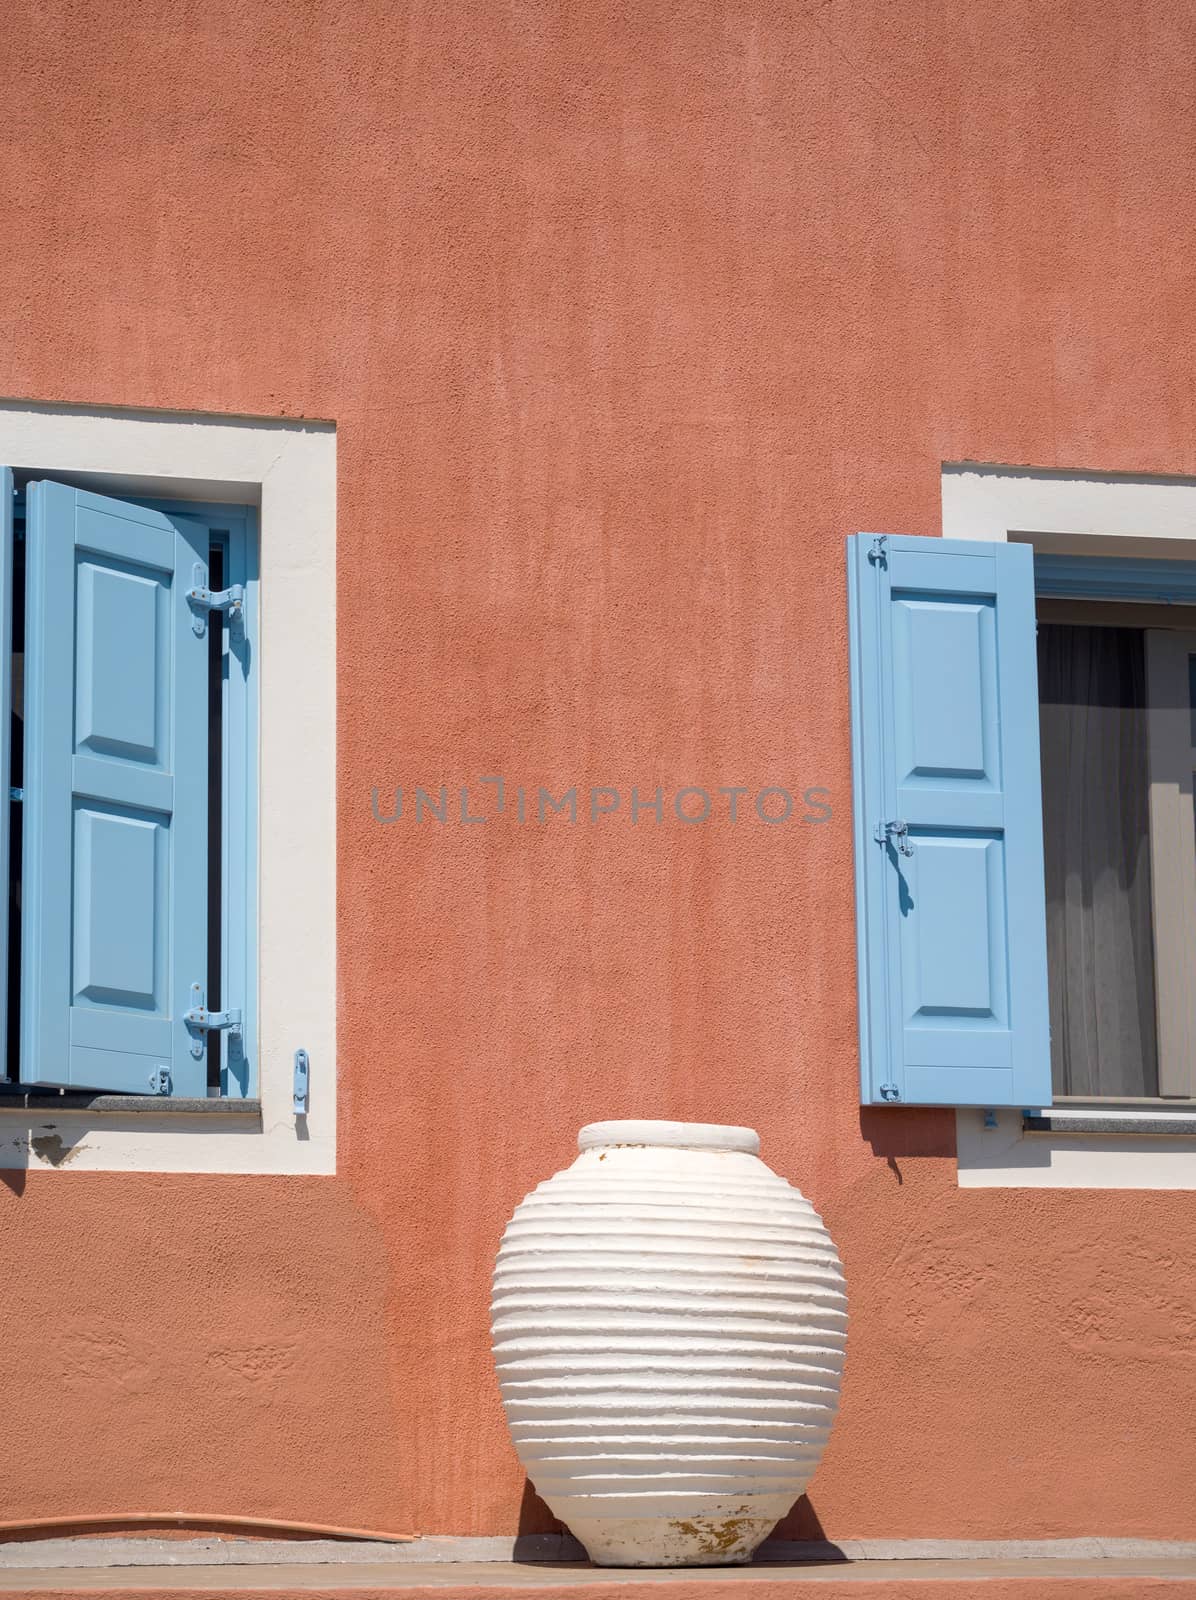 Exterior of a traditional greek house with blue windows and a pot in Assos village, Kefalonia, Ionian Islands, Greece